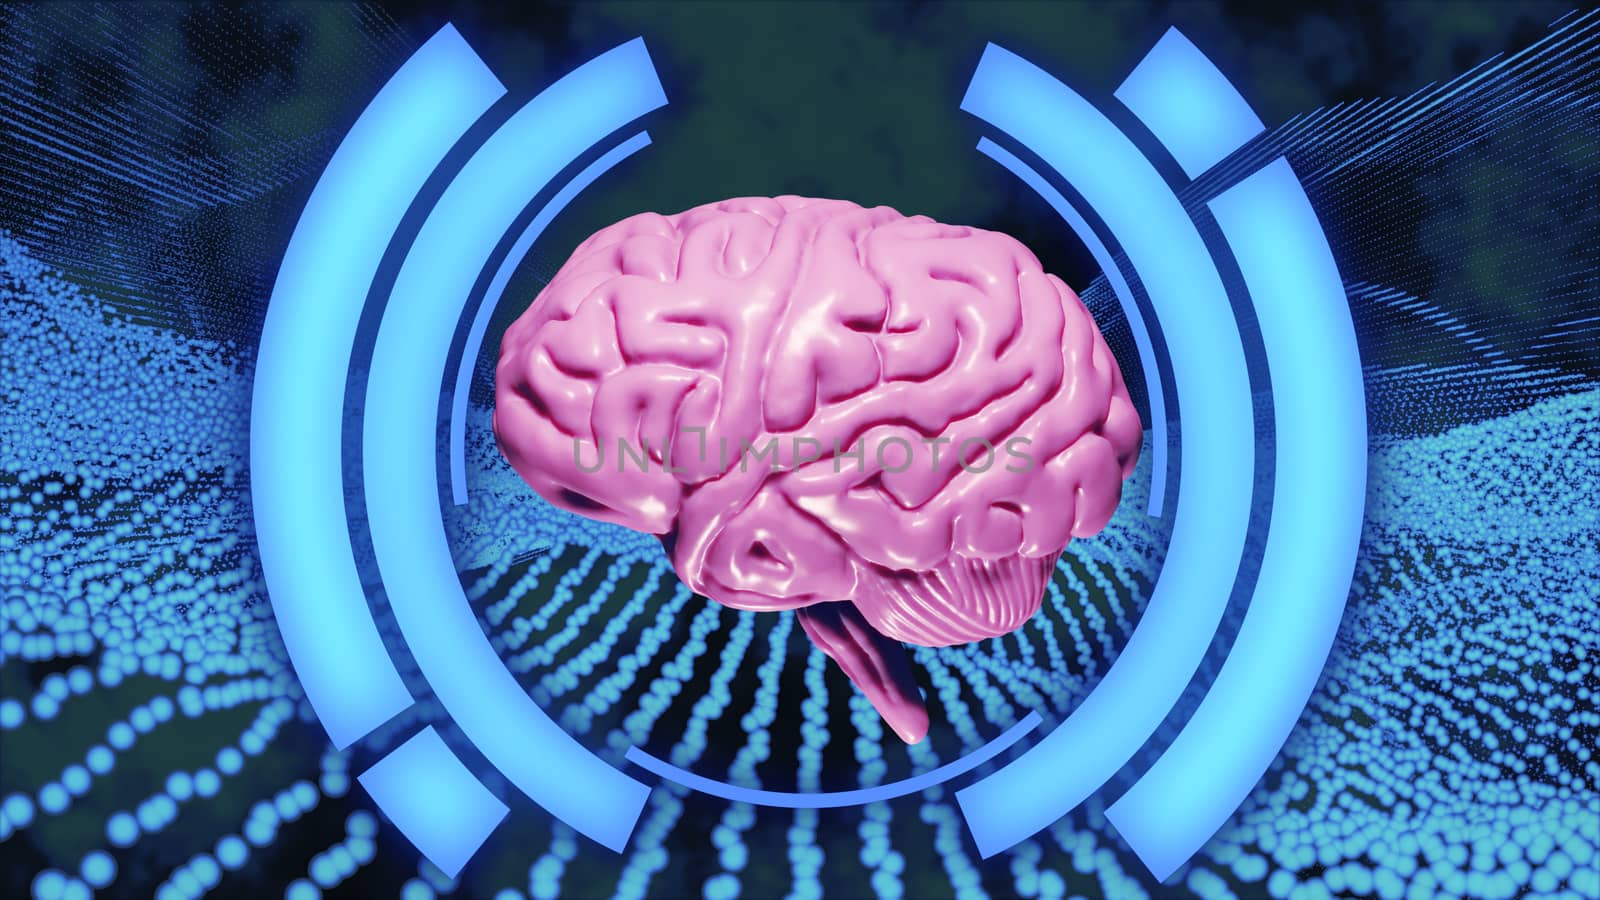 8K 3D rendered Realistic Brain with Light Pink tinted on Blue Abstract HUD and Particles field Background by ariya23156